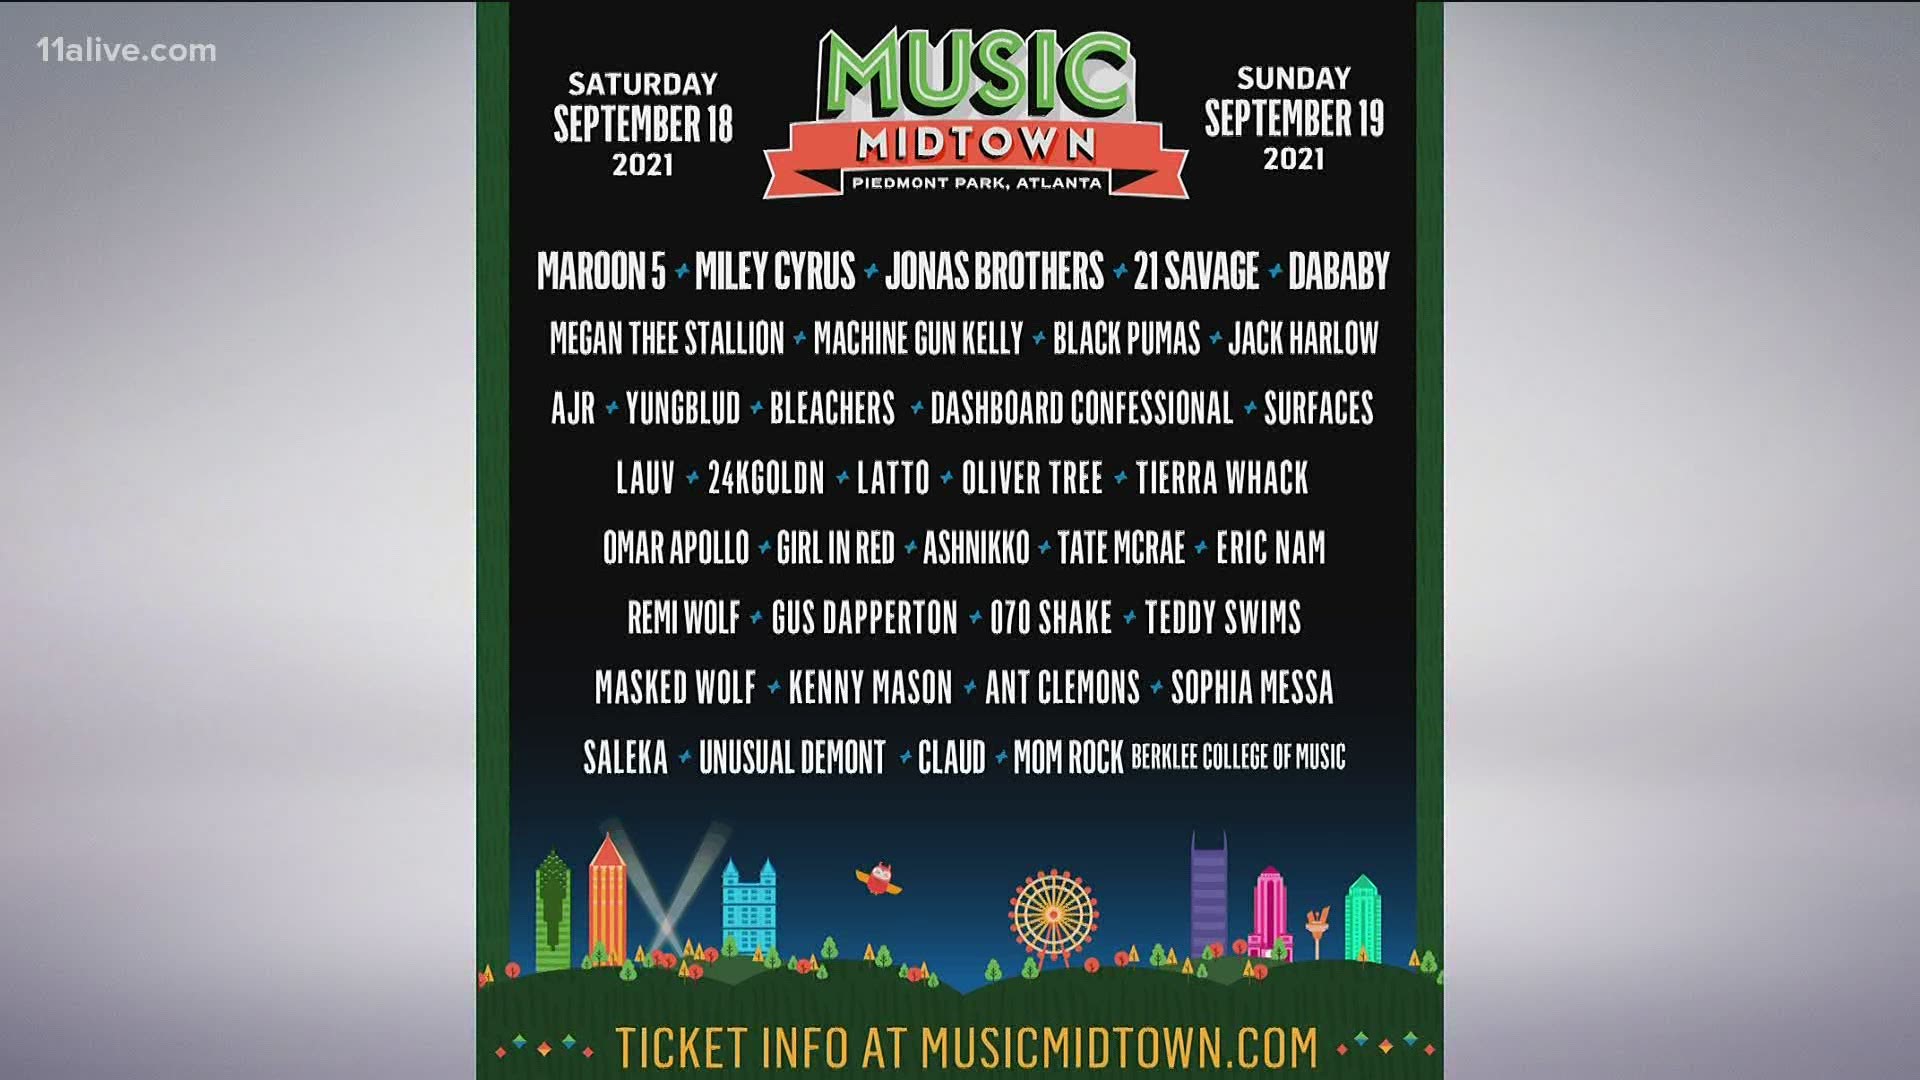 Music Midtown is scheduled for Saturday, Sept. 18 and Sunday, Sept. 19, 2021.